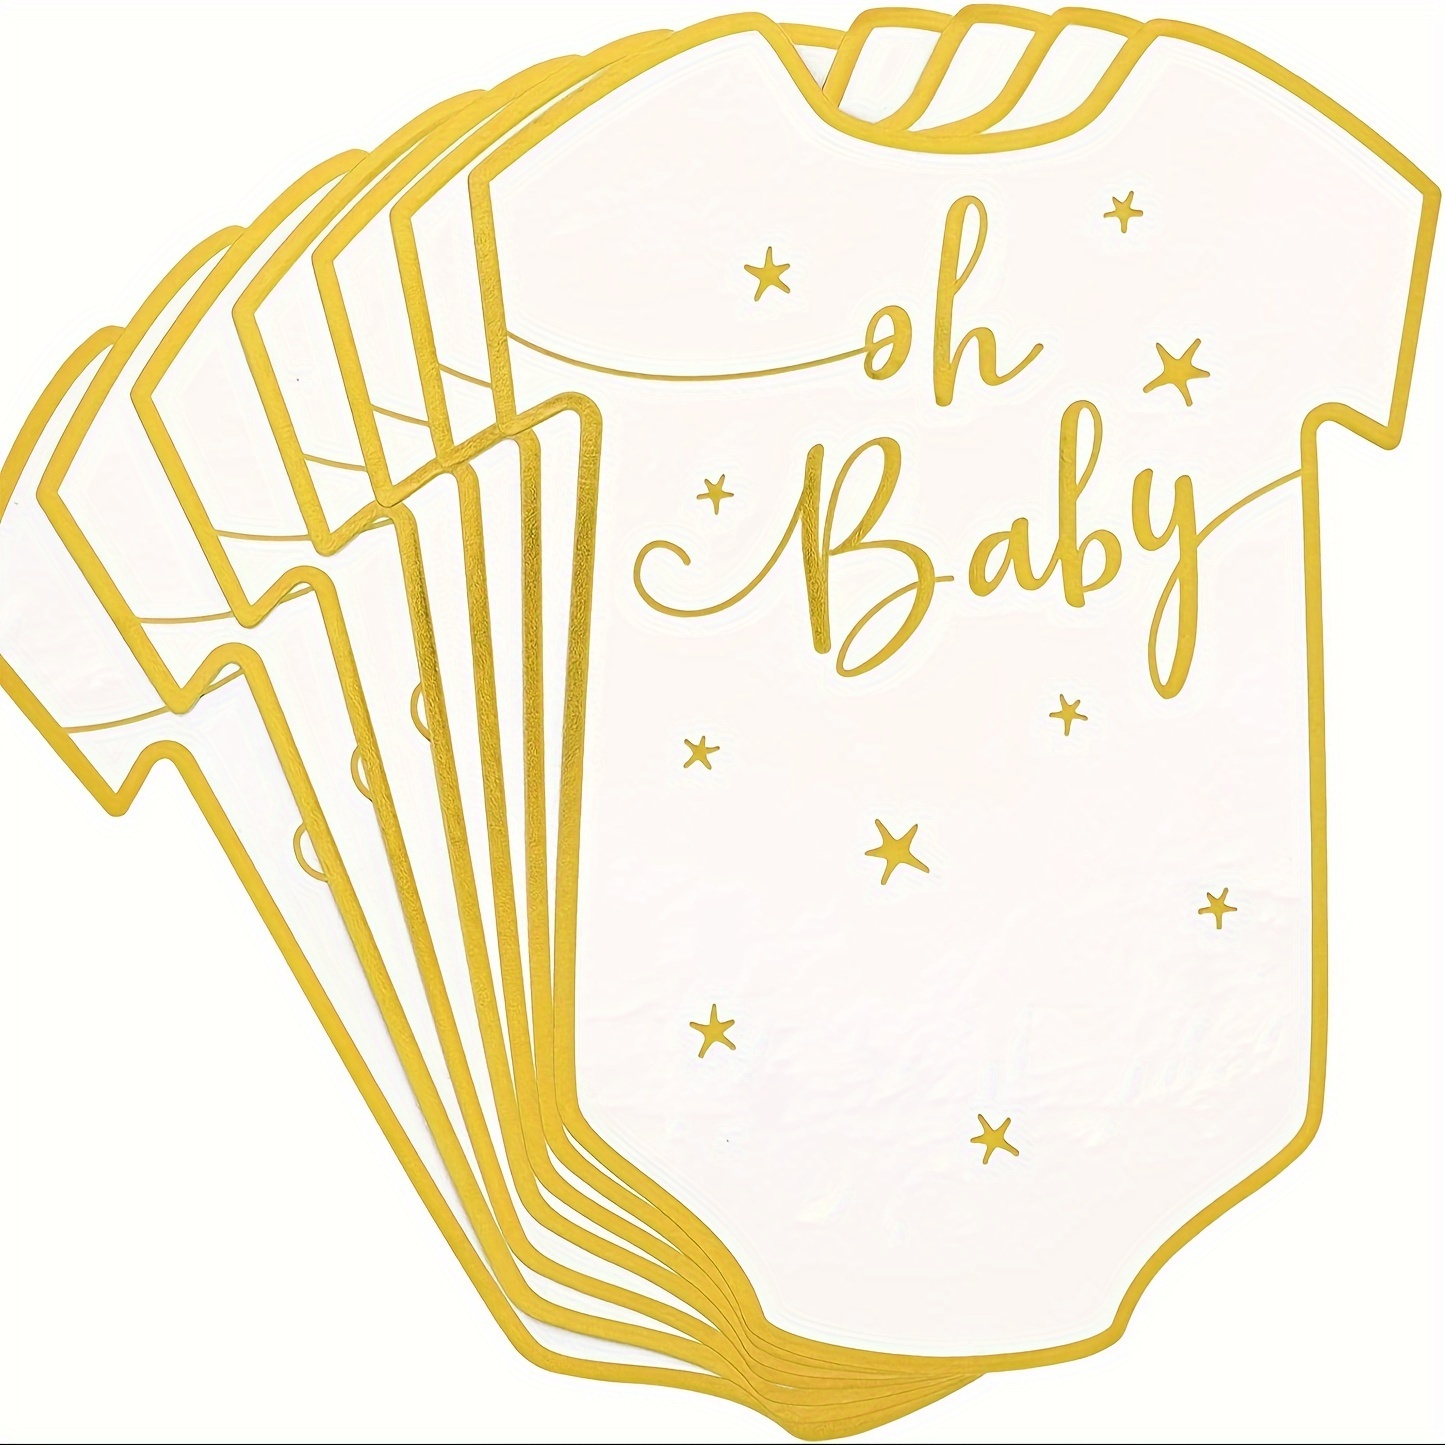 5.4K+ Free Templates for 'Clothes tags